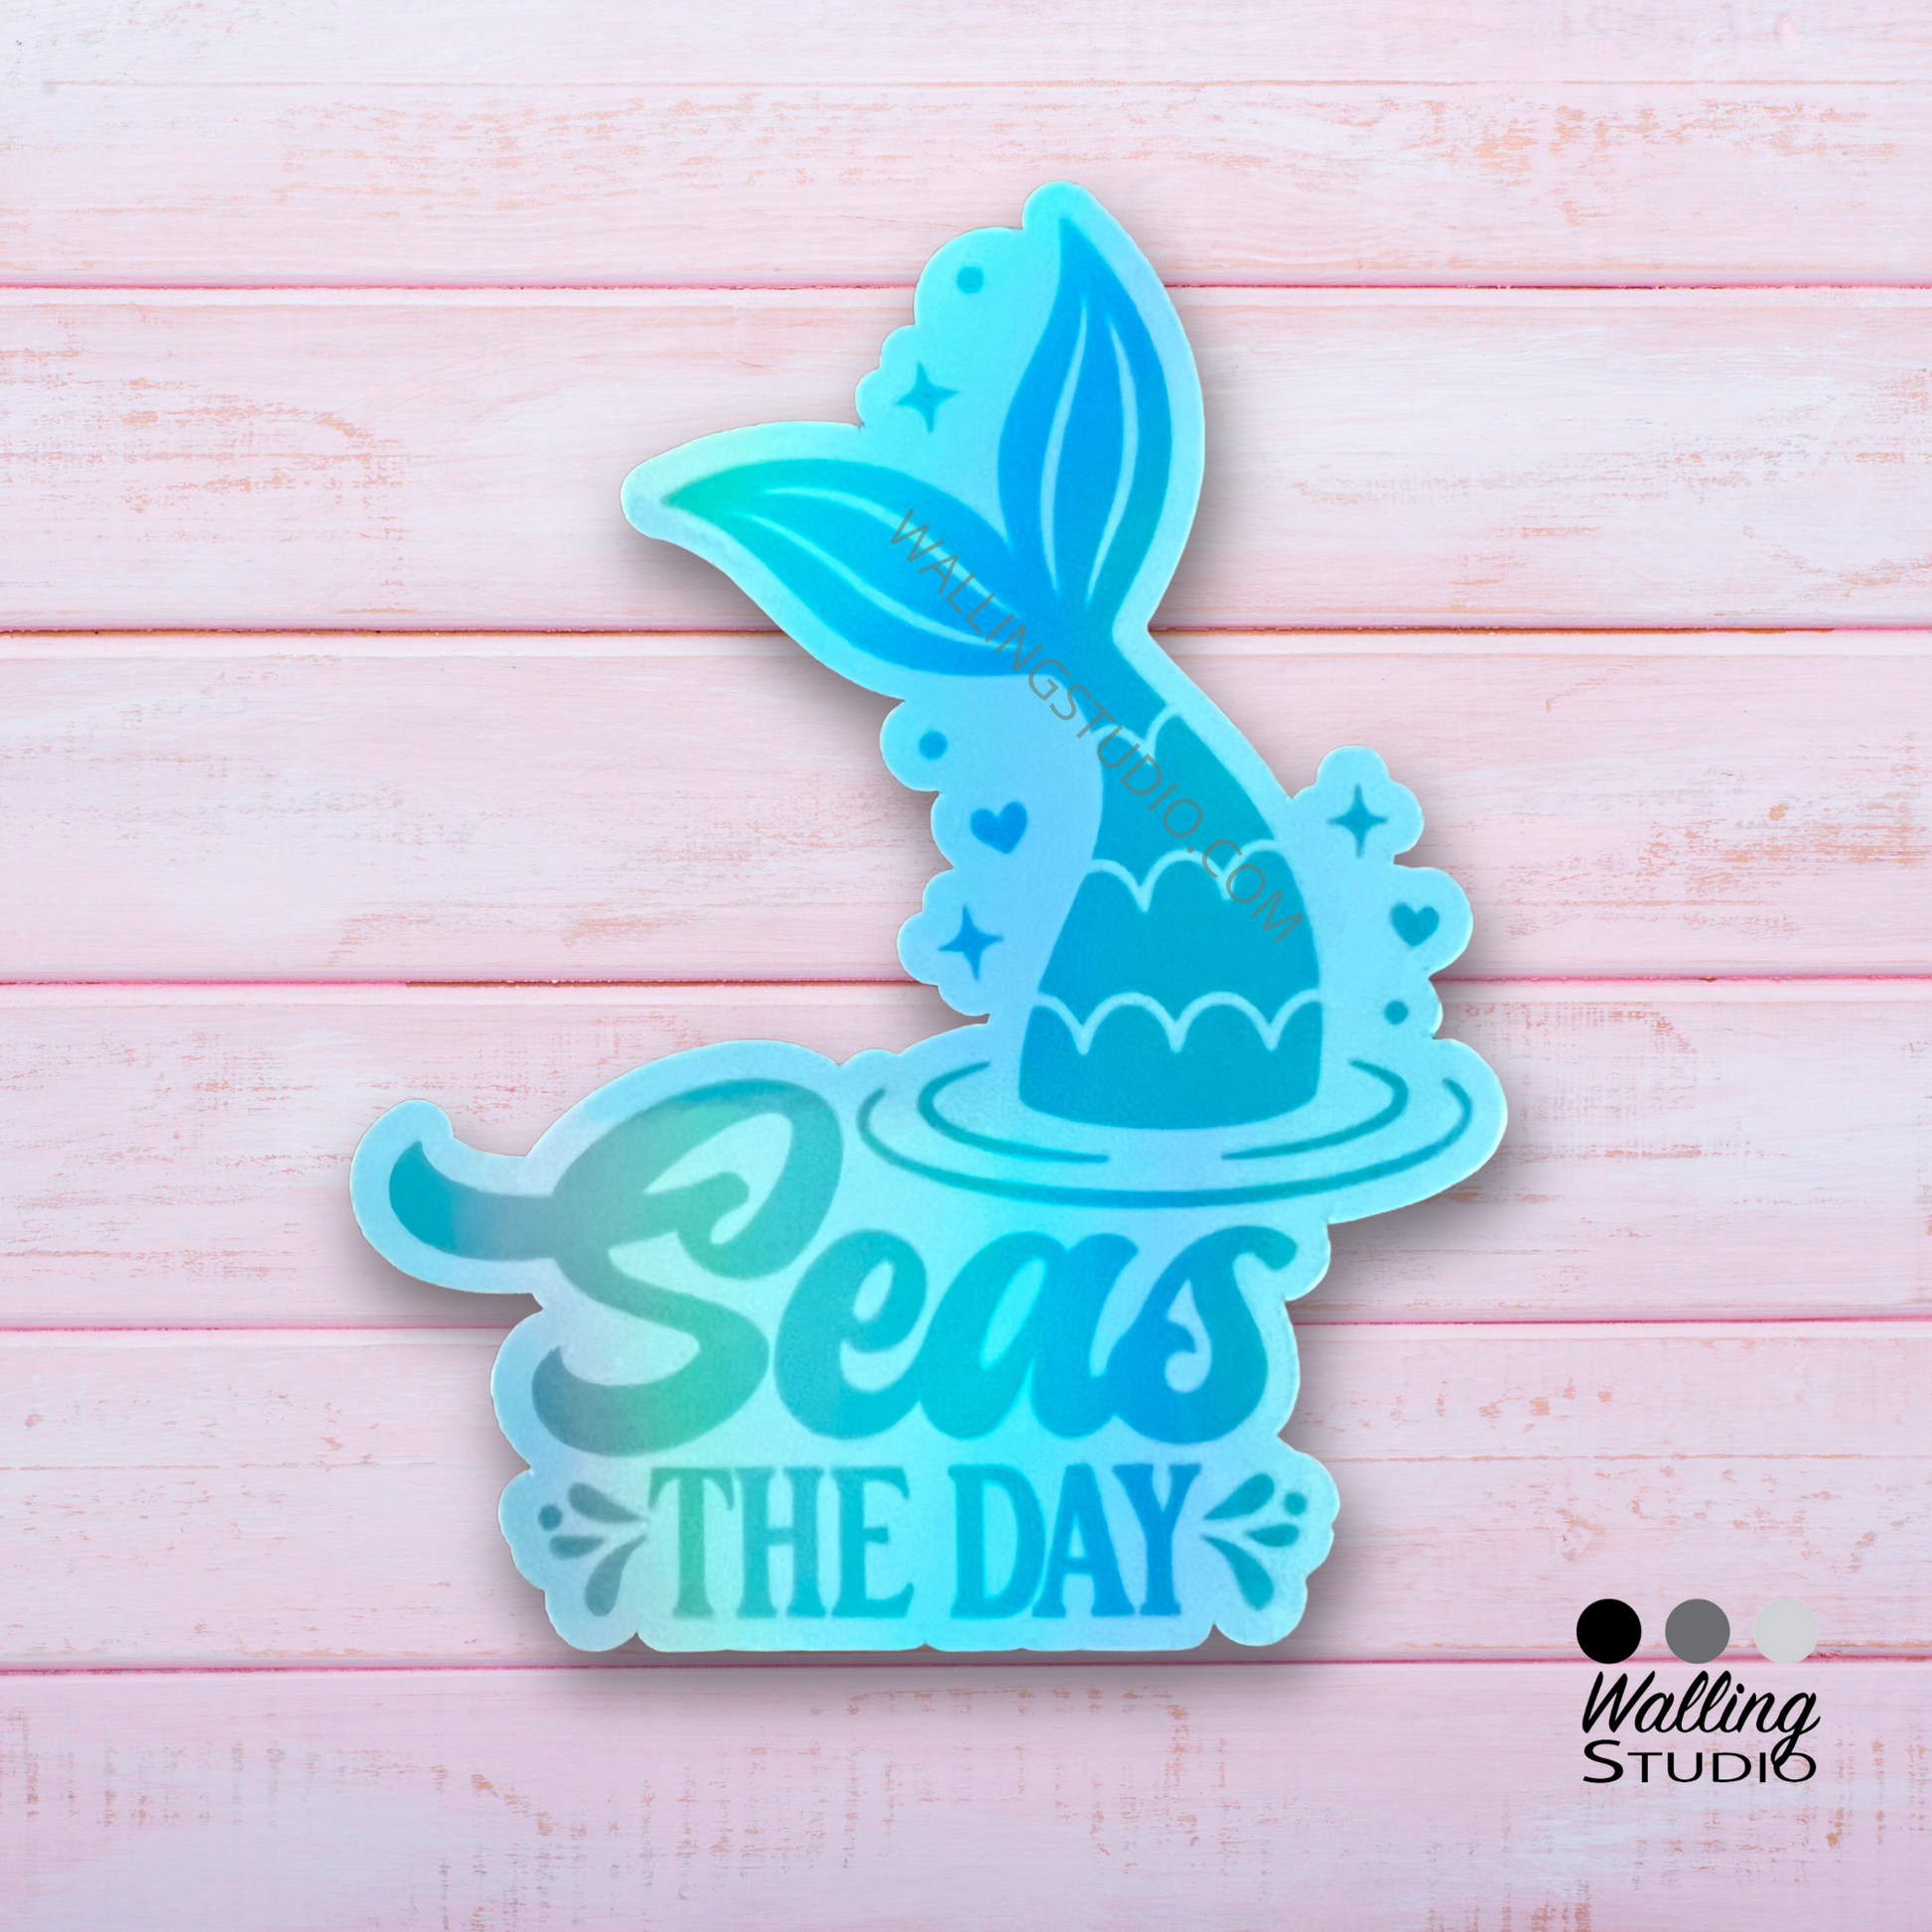 This sticker is perfect for adding a touch of magic to your favorite belongings. Stick it on your water bottle, laptop, notebook, or anywhere you desire, and let this sticker be a daily reminder to embrace life's adventures and make a splash wherever you go.